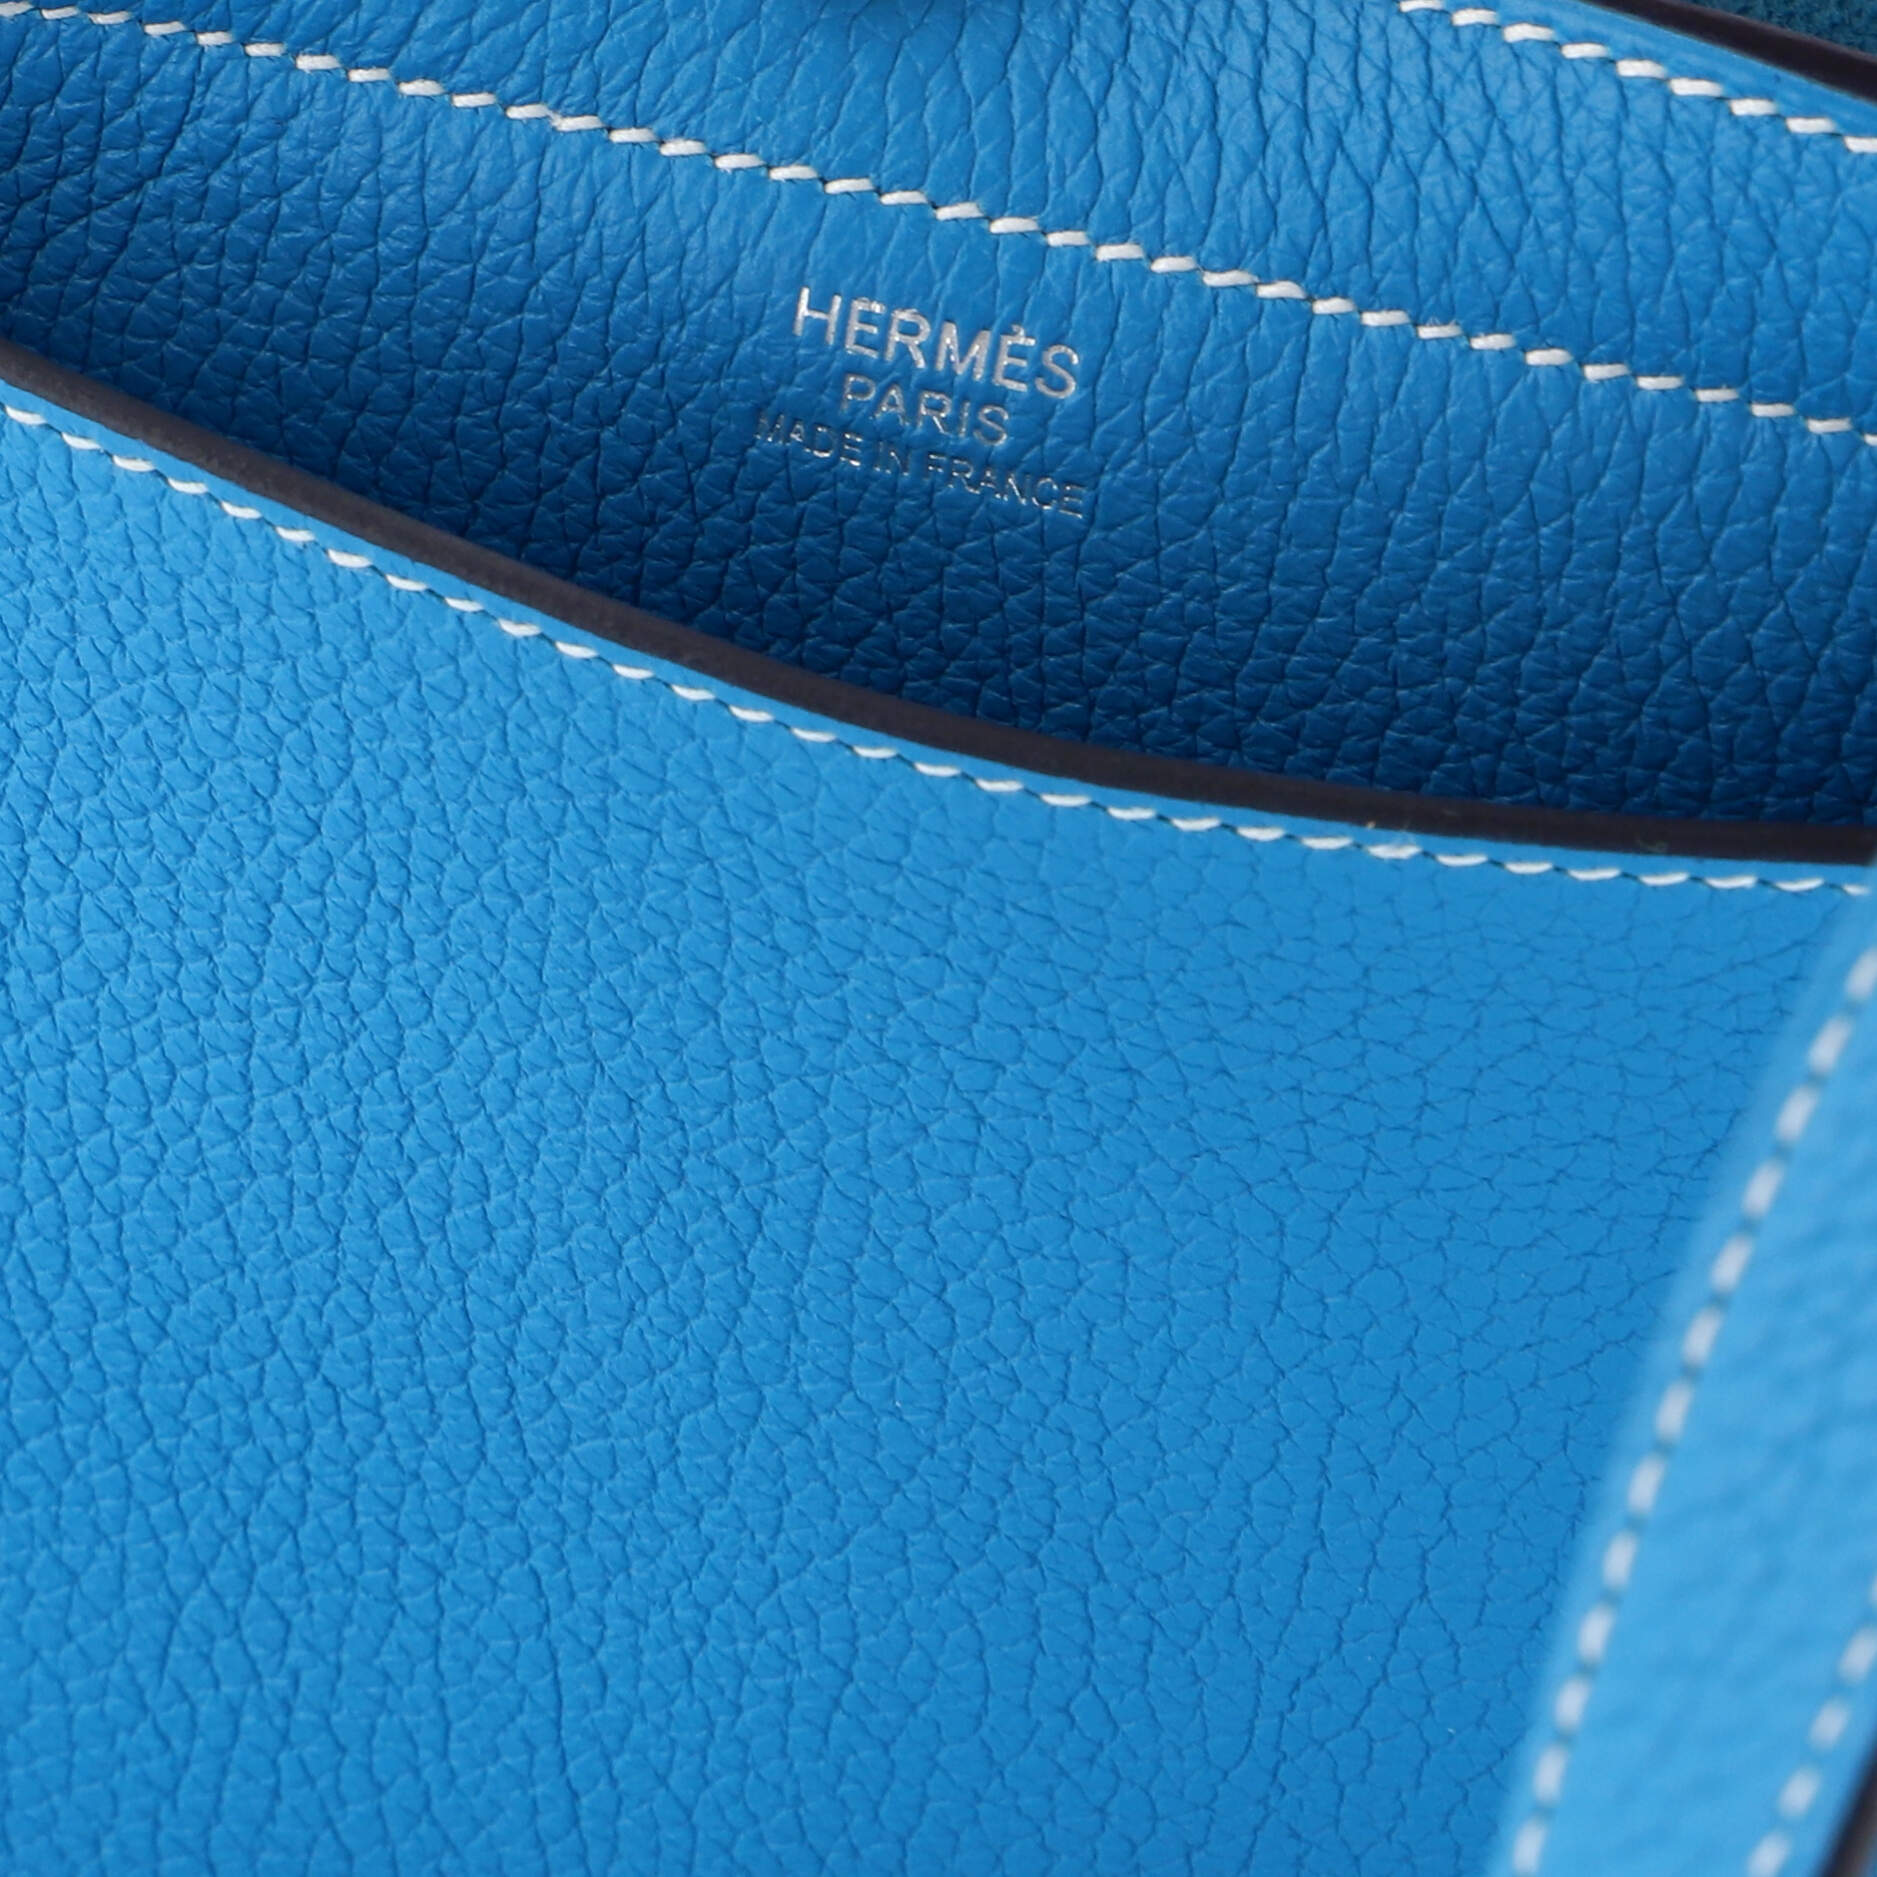 Hermes Blue Taurillon Clemence Leather Cabasellier 31 Tote Bag